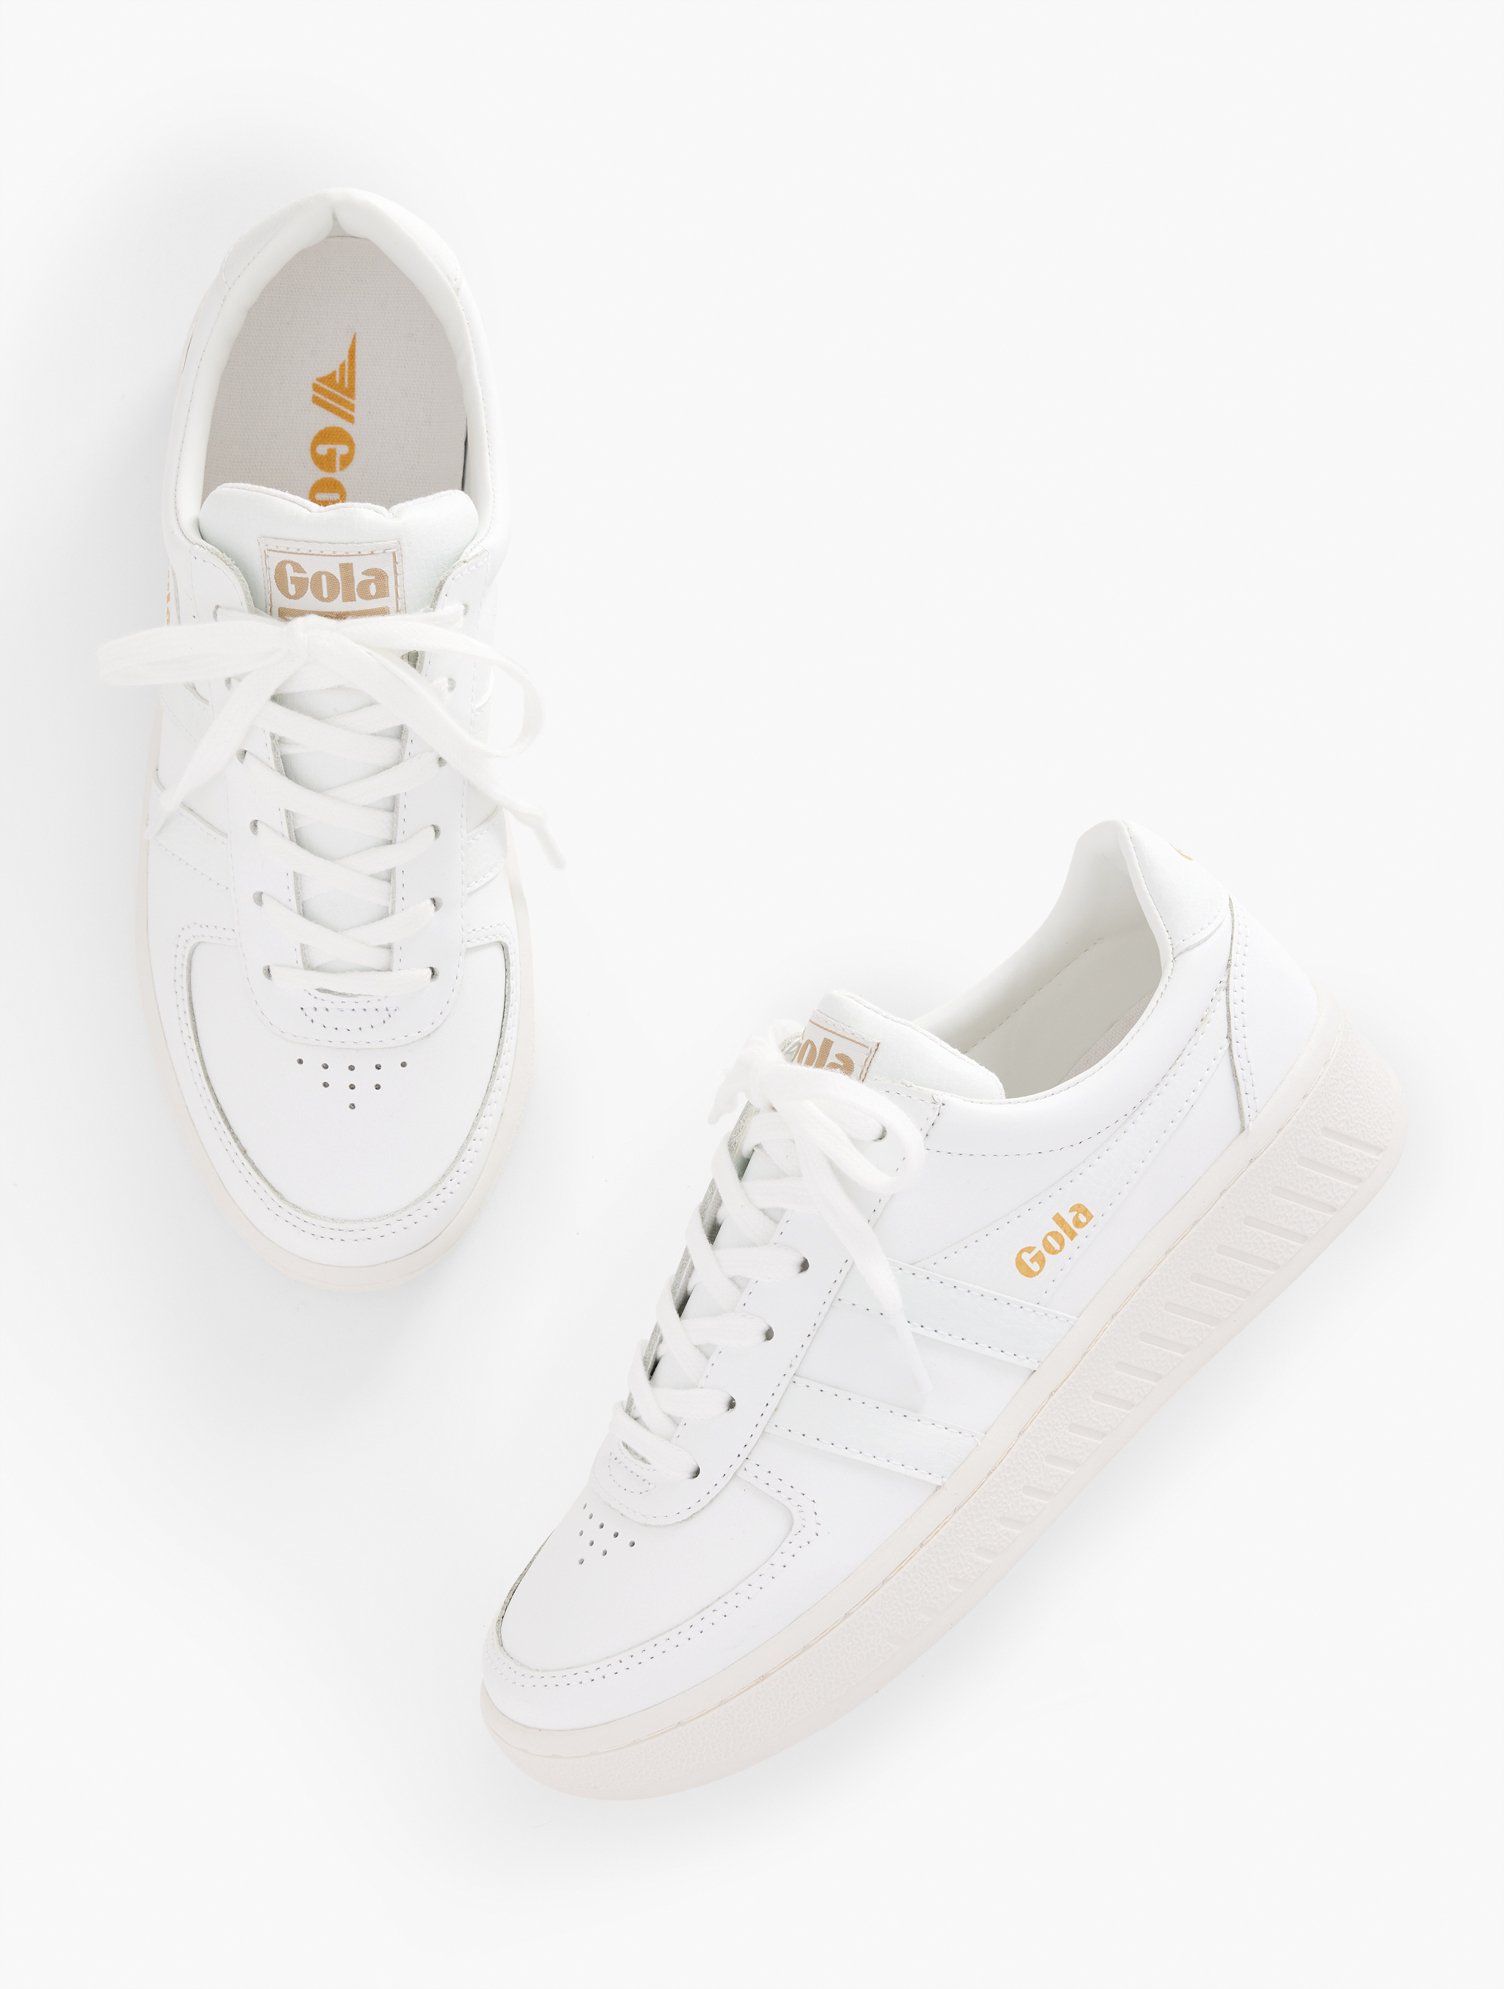 Talbots Golaâ® Grandslam Leather Sneakers - White - 8 1/2 M